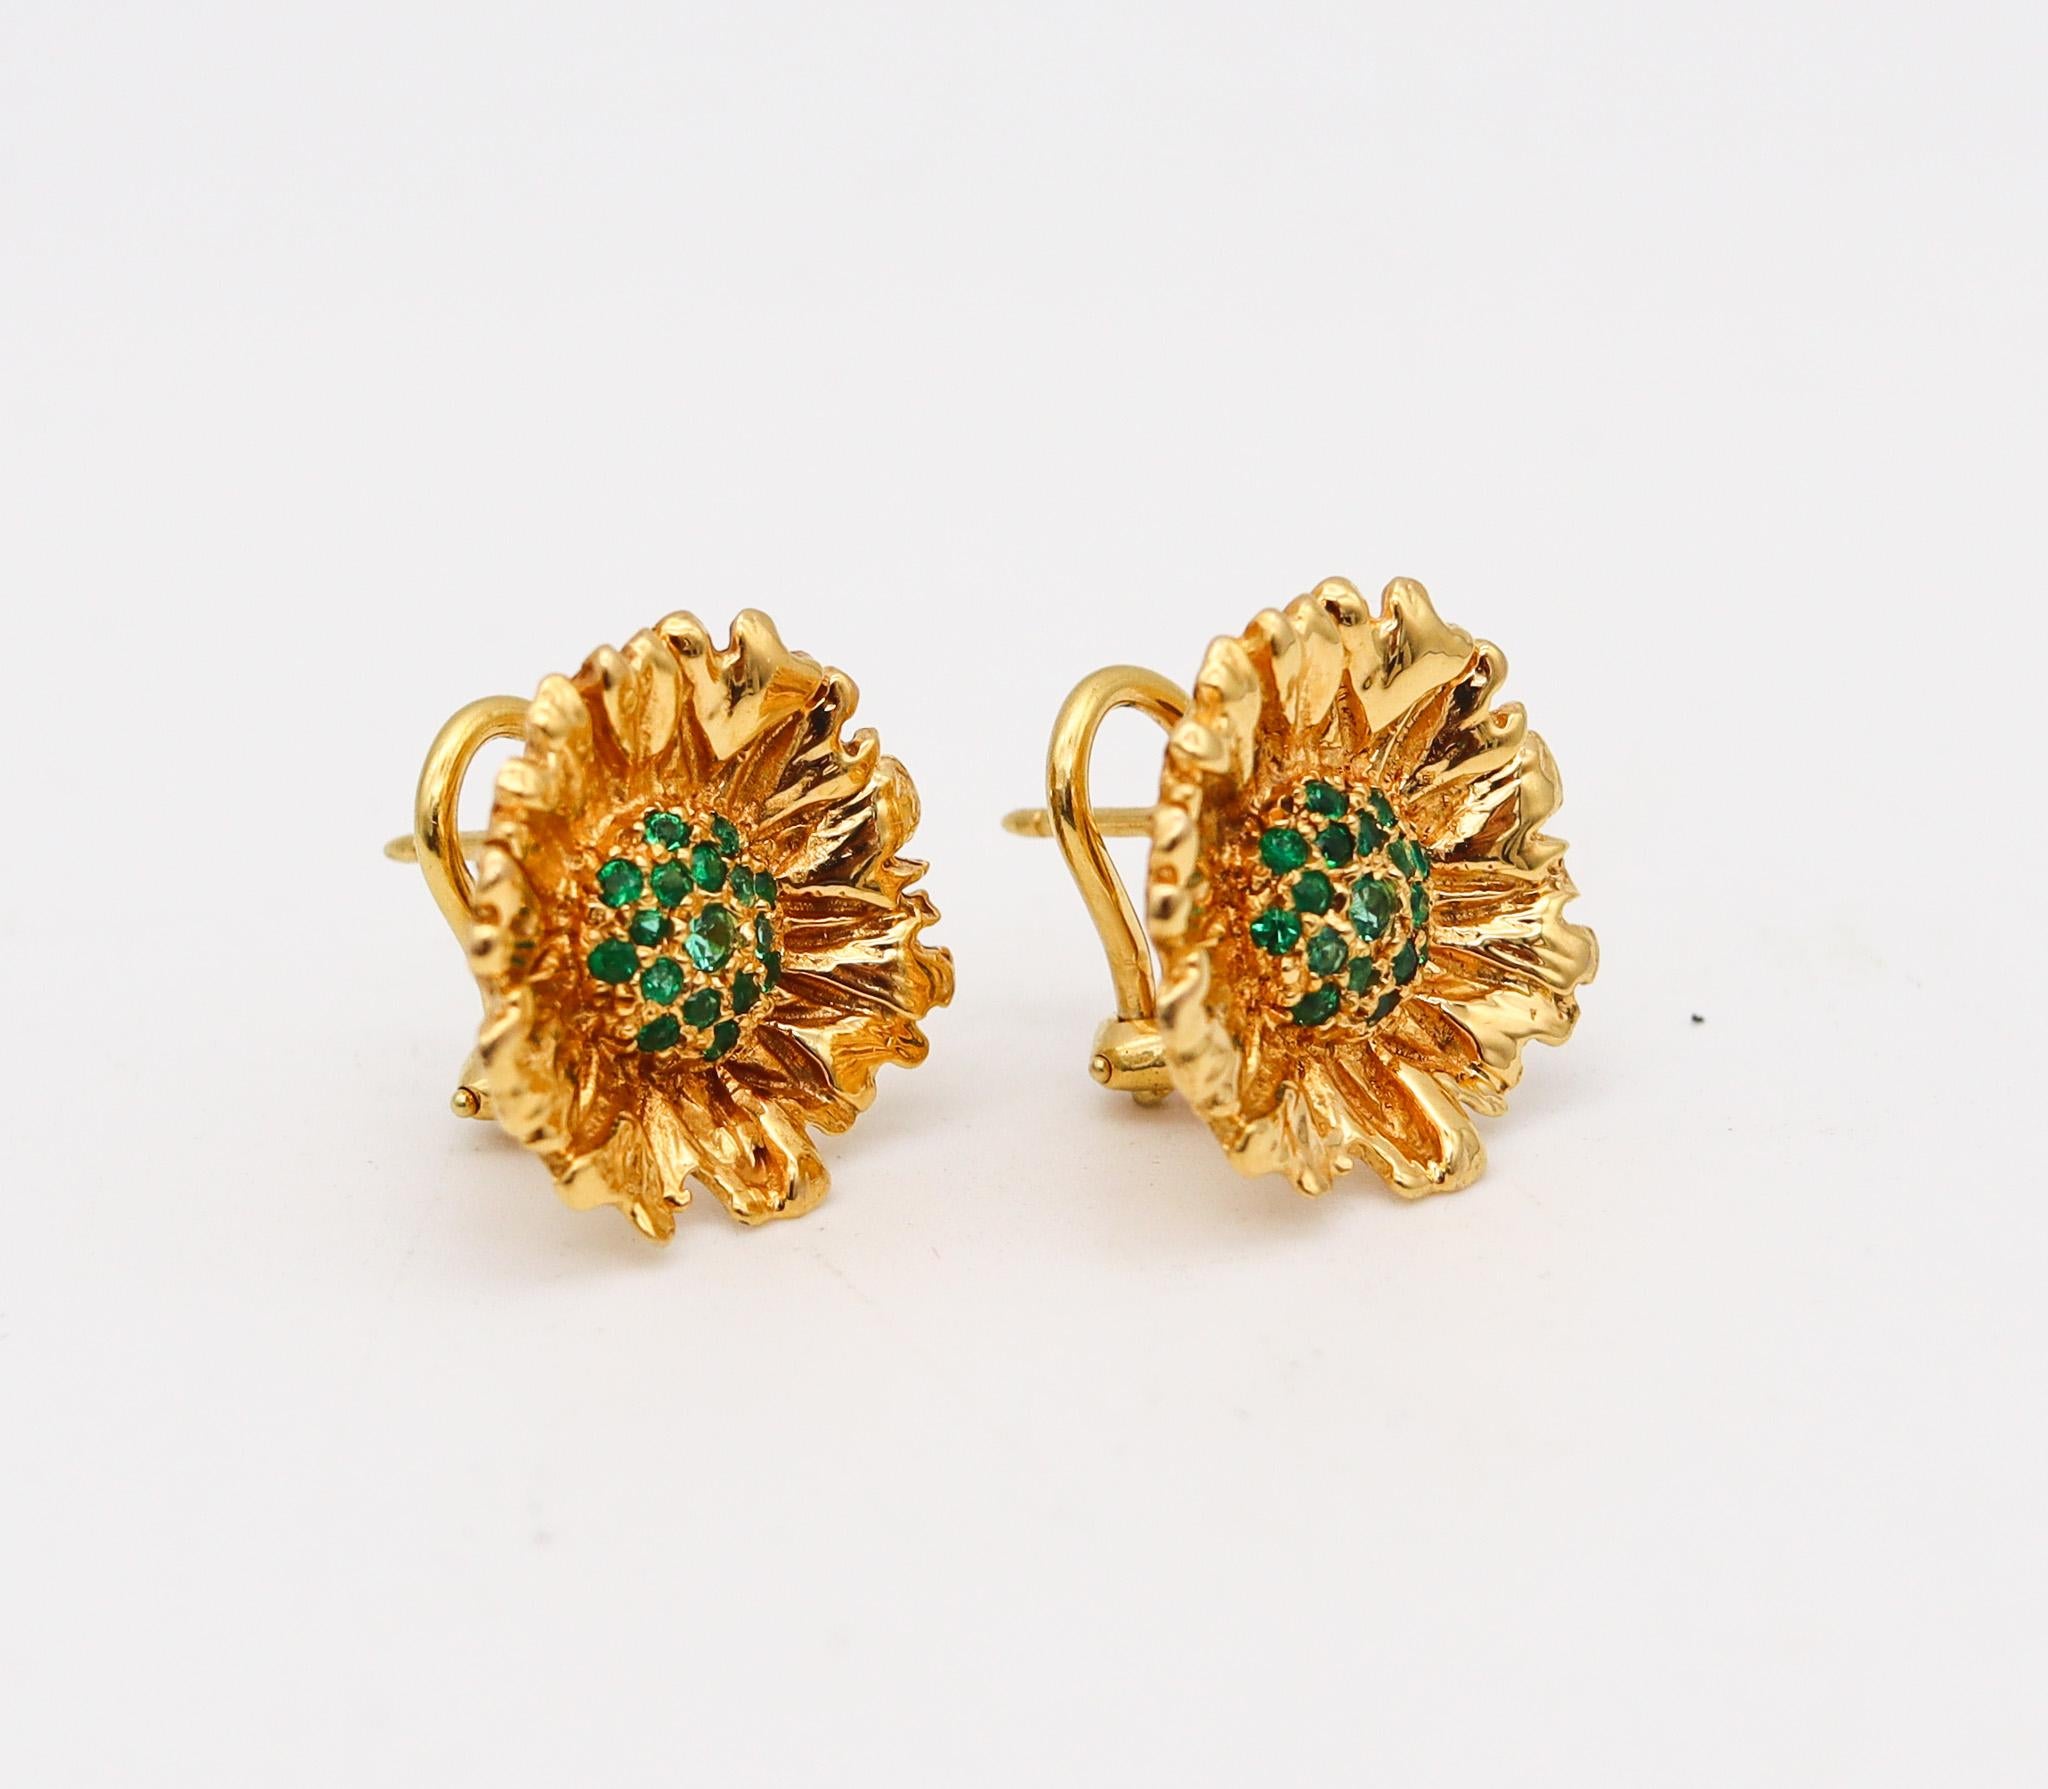 Sunflowers clips-earrings designed by Robert Bruce Bielka.

Very nice and youthful pair of earrings, created by Robert Bruce Bielka back in the late 20th century. These pair of earrings was carefully crafted in the shape of tropical flowers in